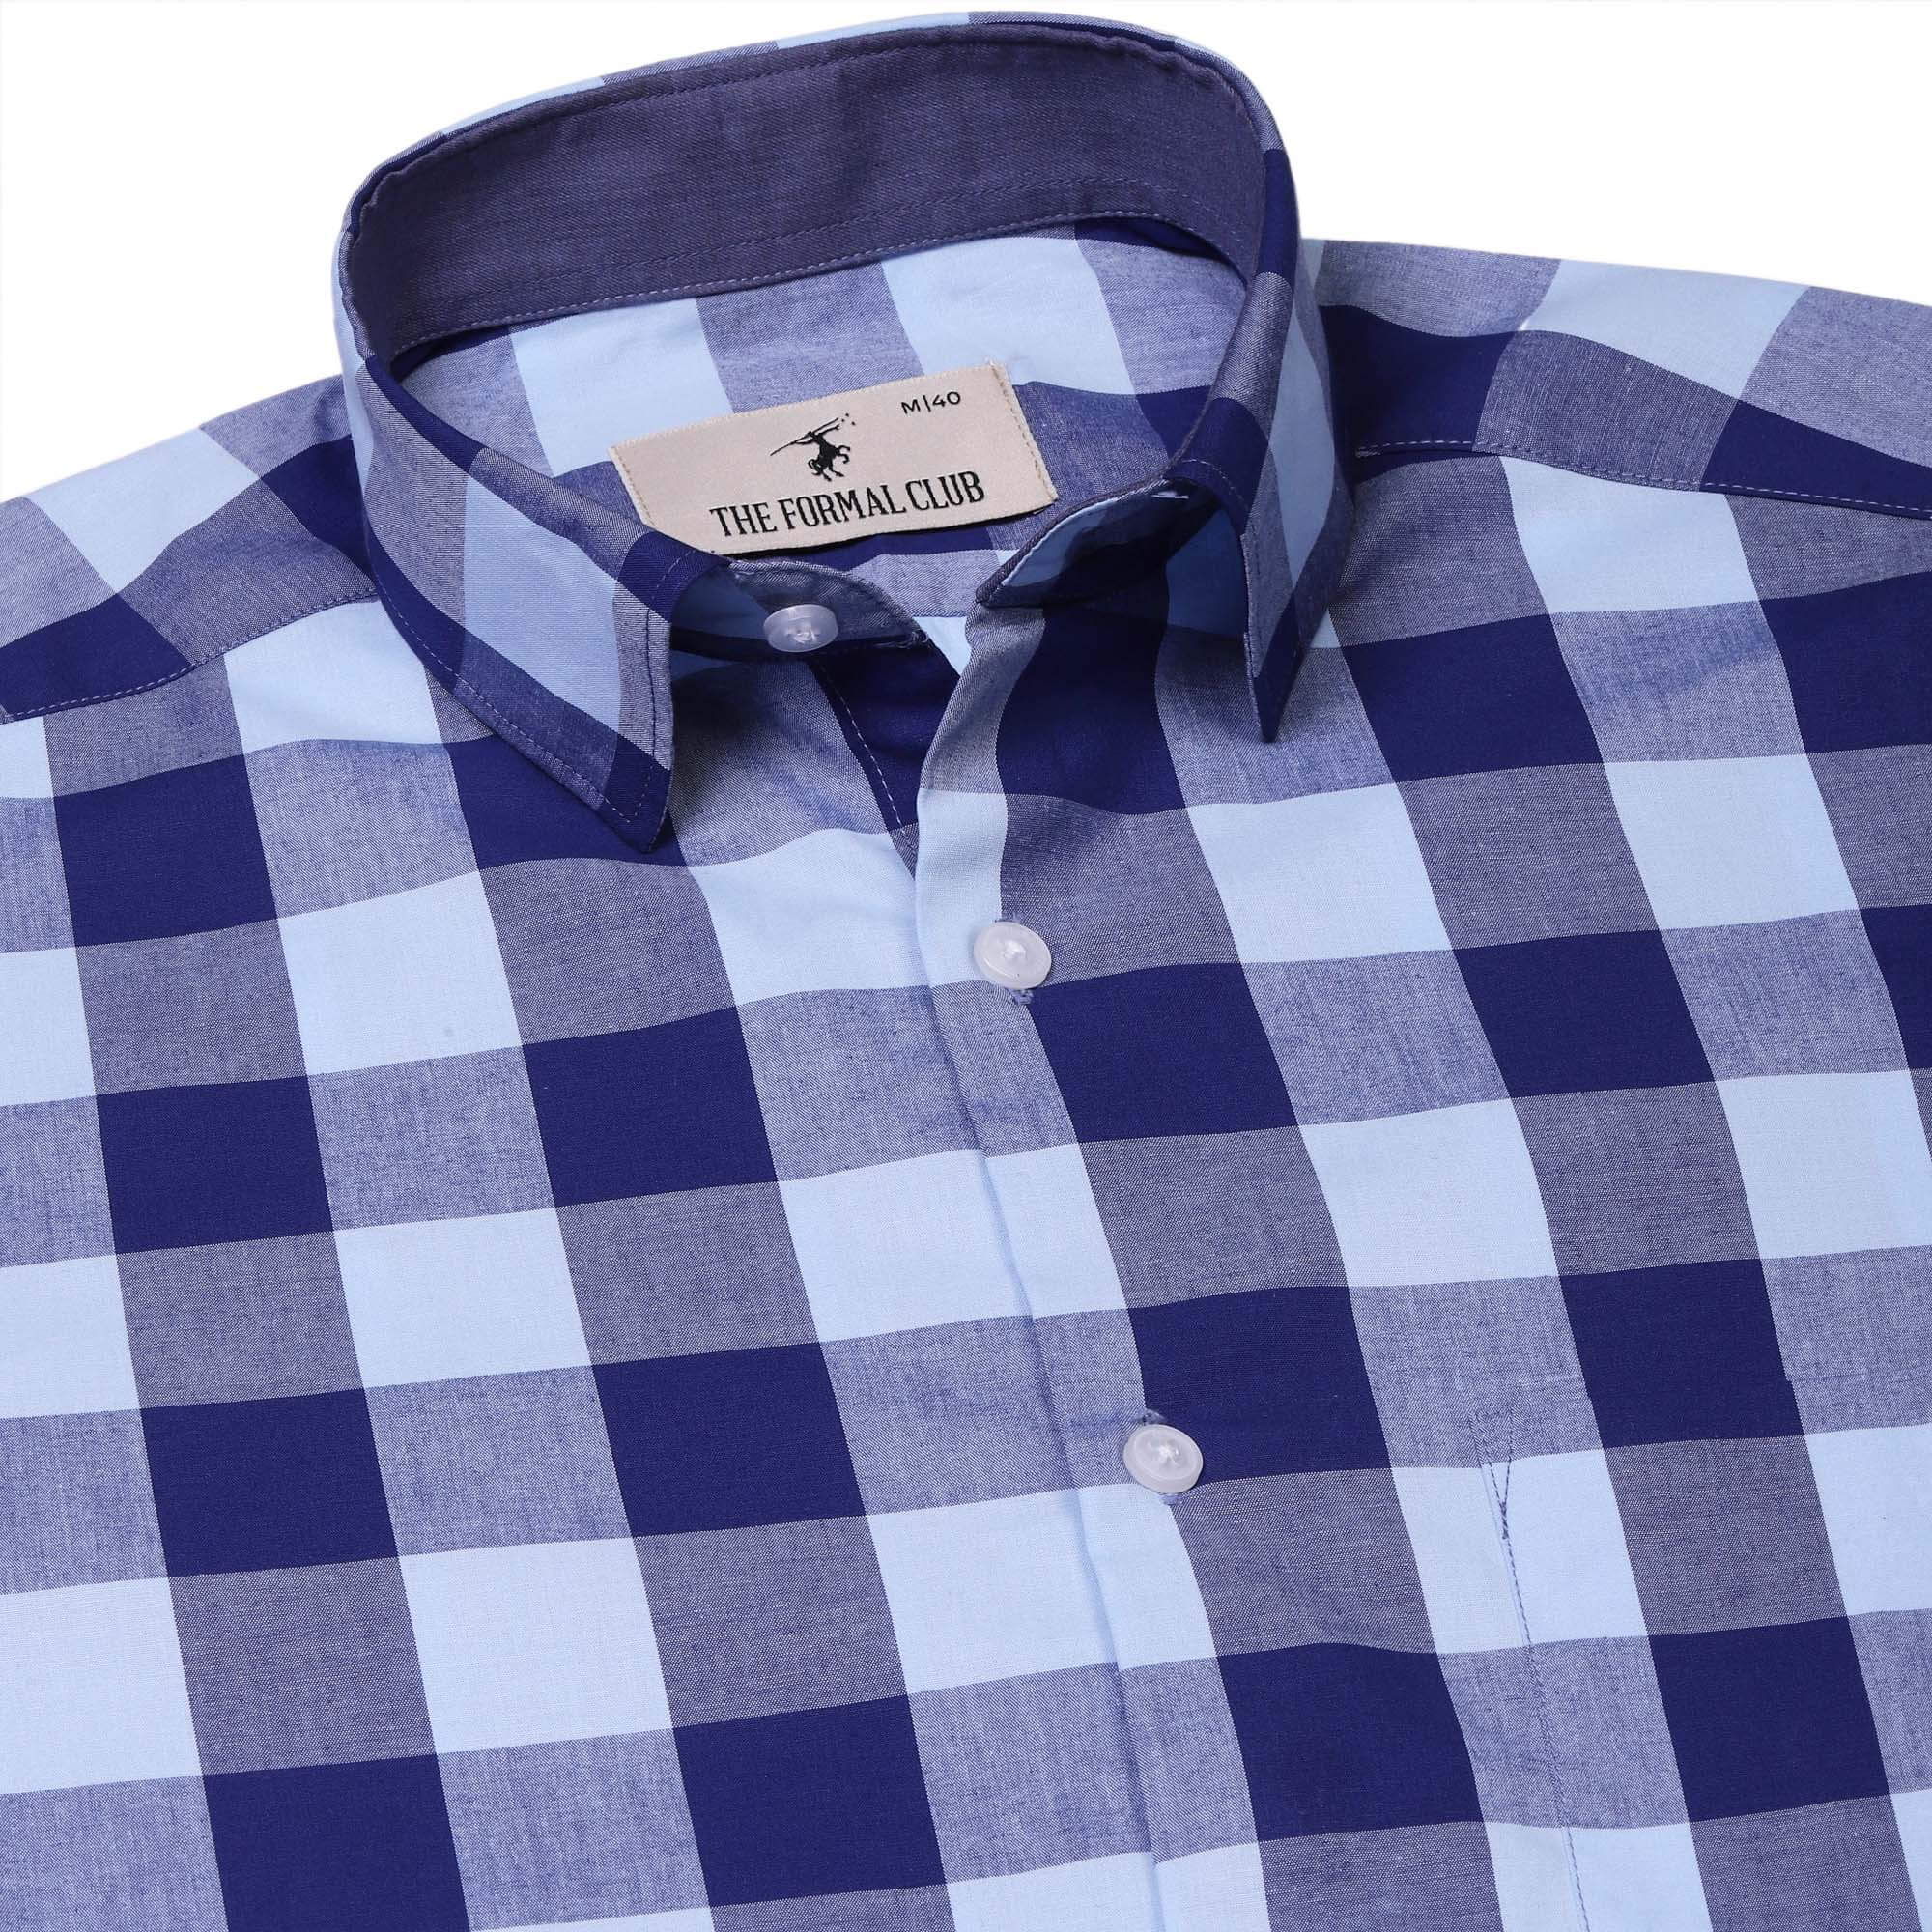 Zephyr Check Shirt In Navy Blue Regular Fit - The Formal Club